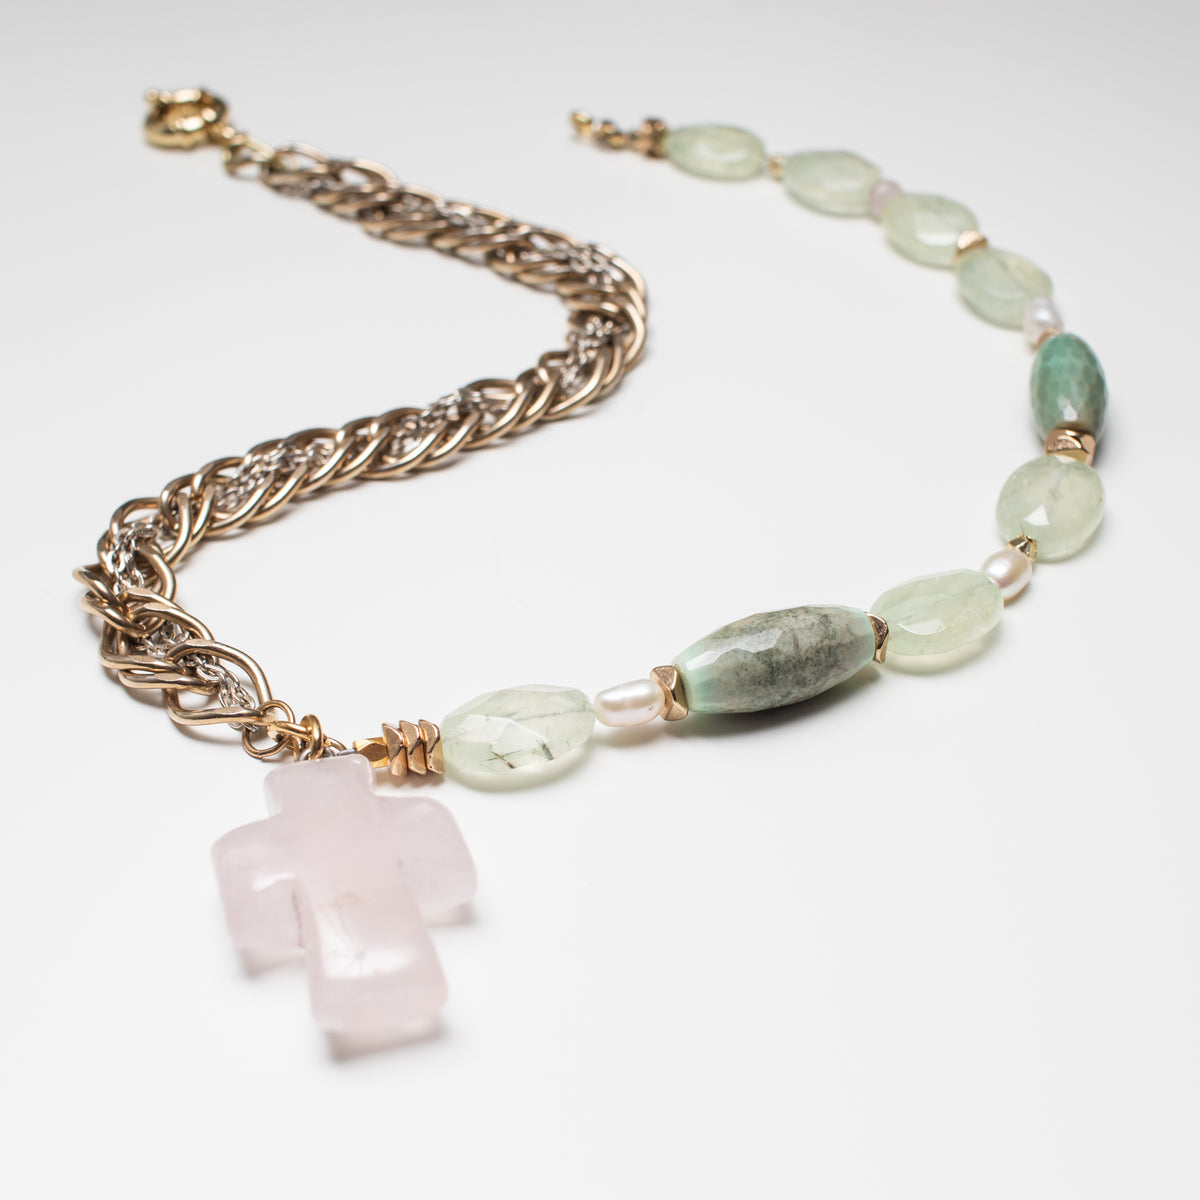 Shea Multi Crystal Necklace (Rose gold)